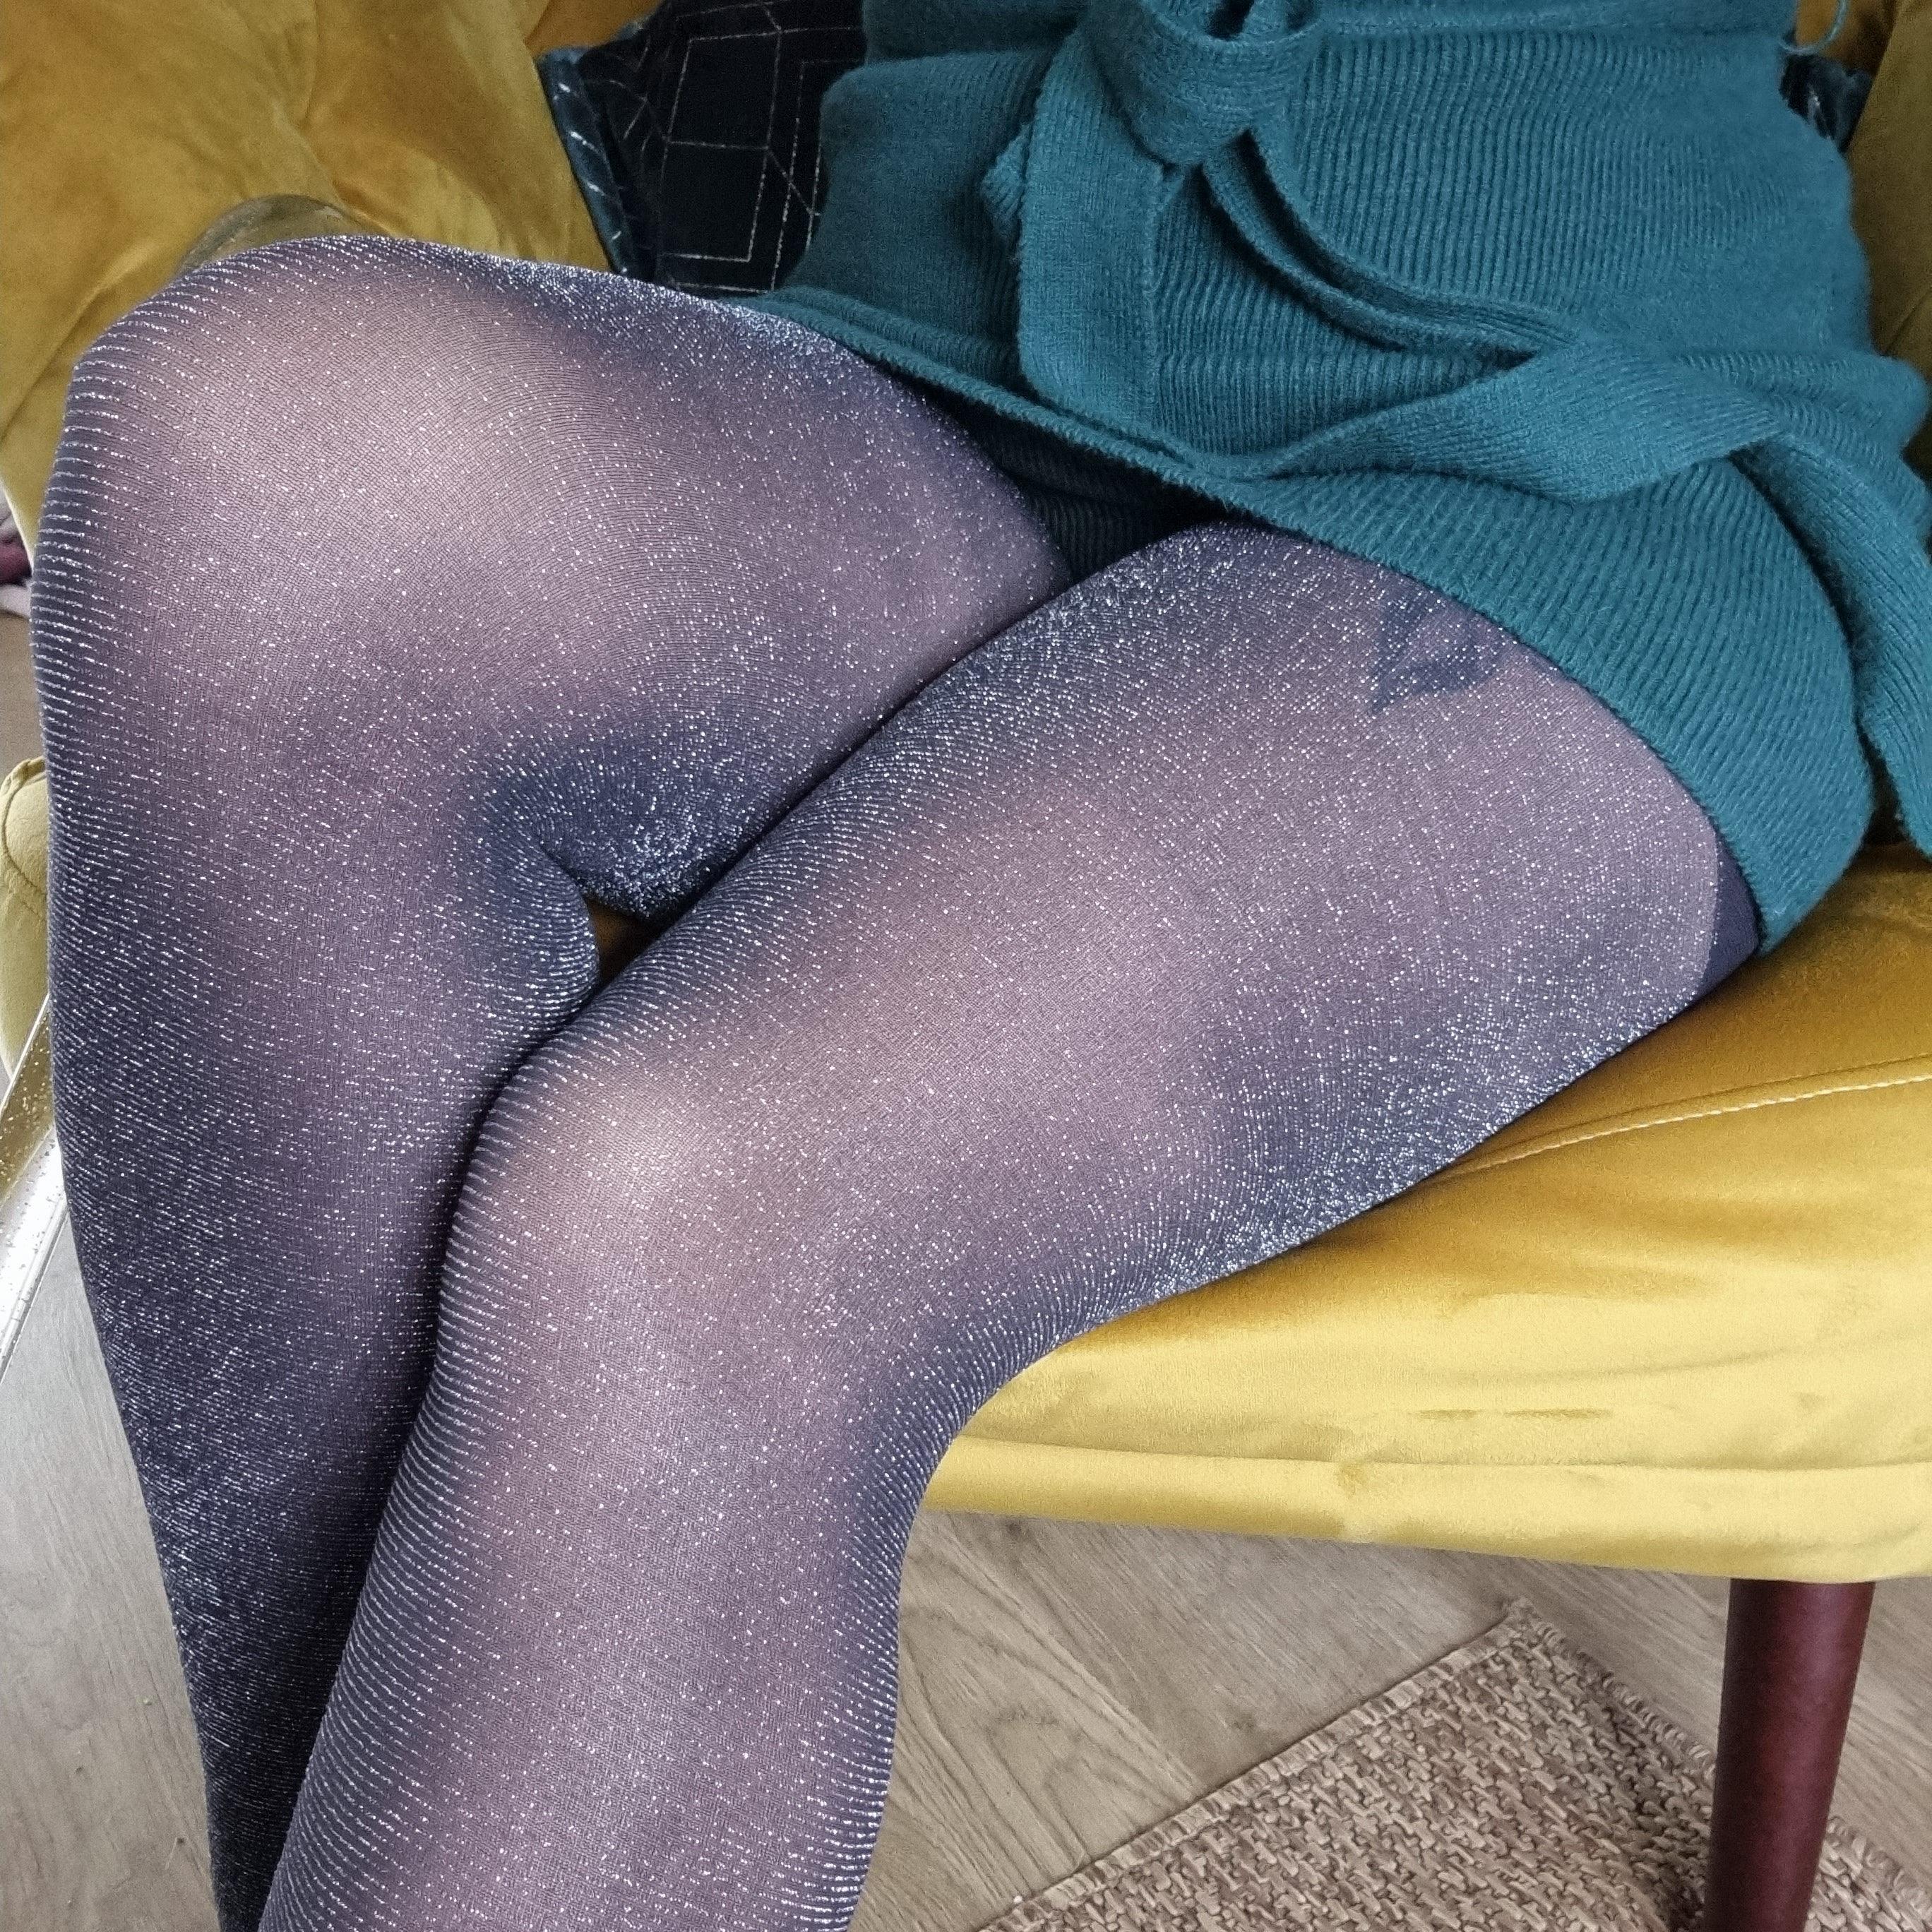 The Shimmer, Sparkly Tights